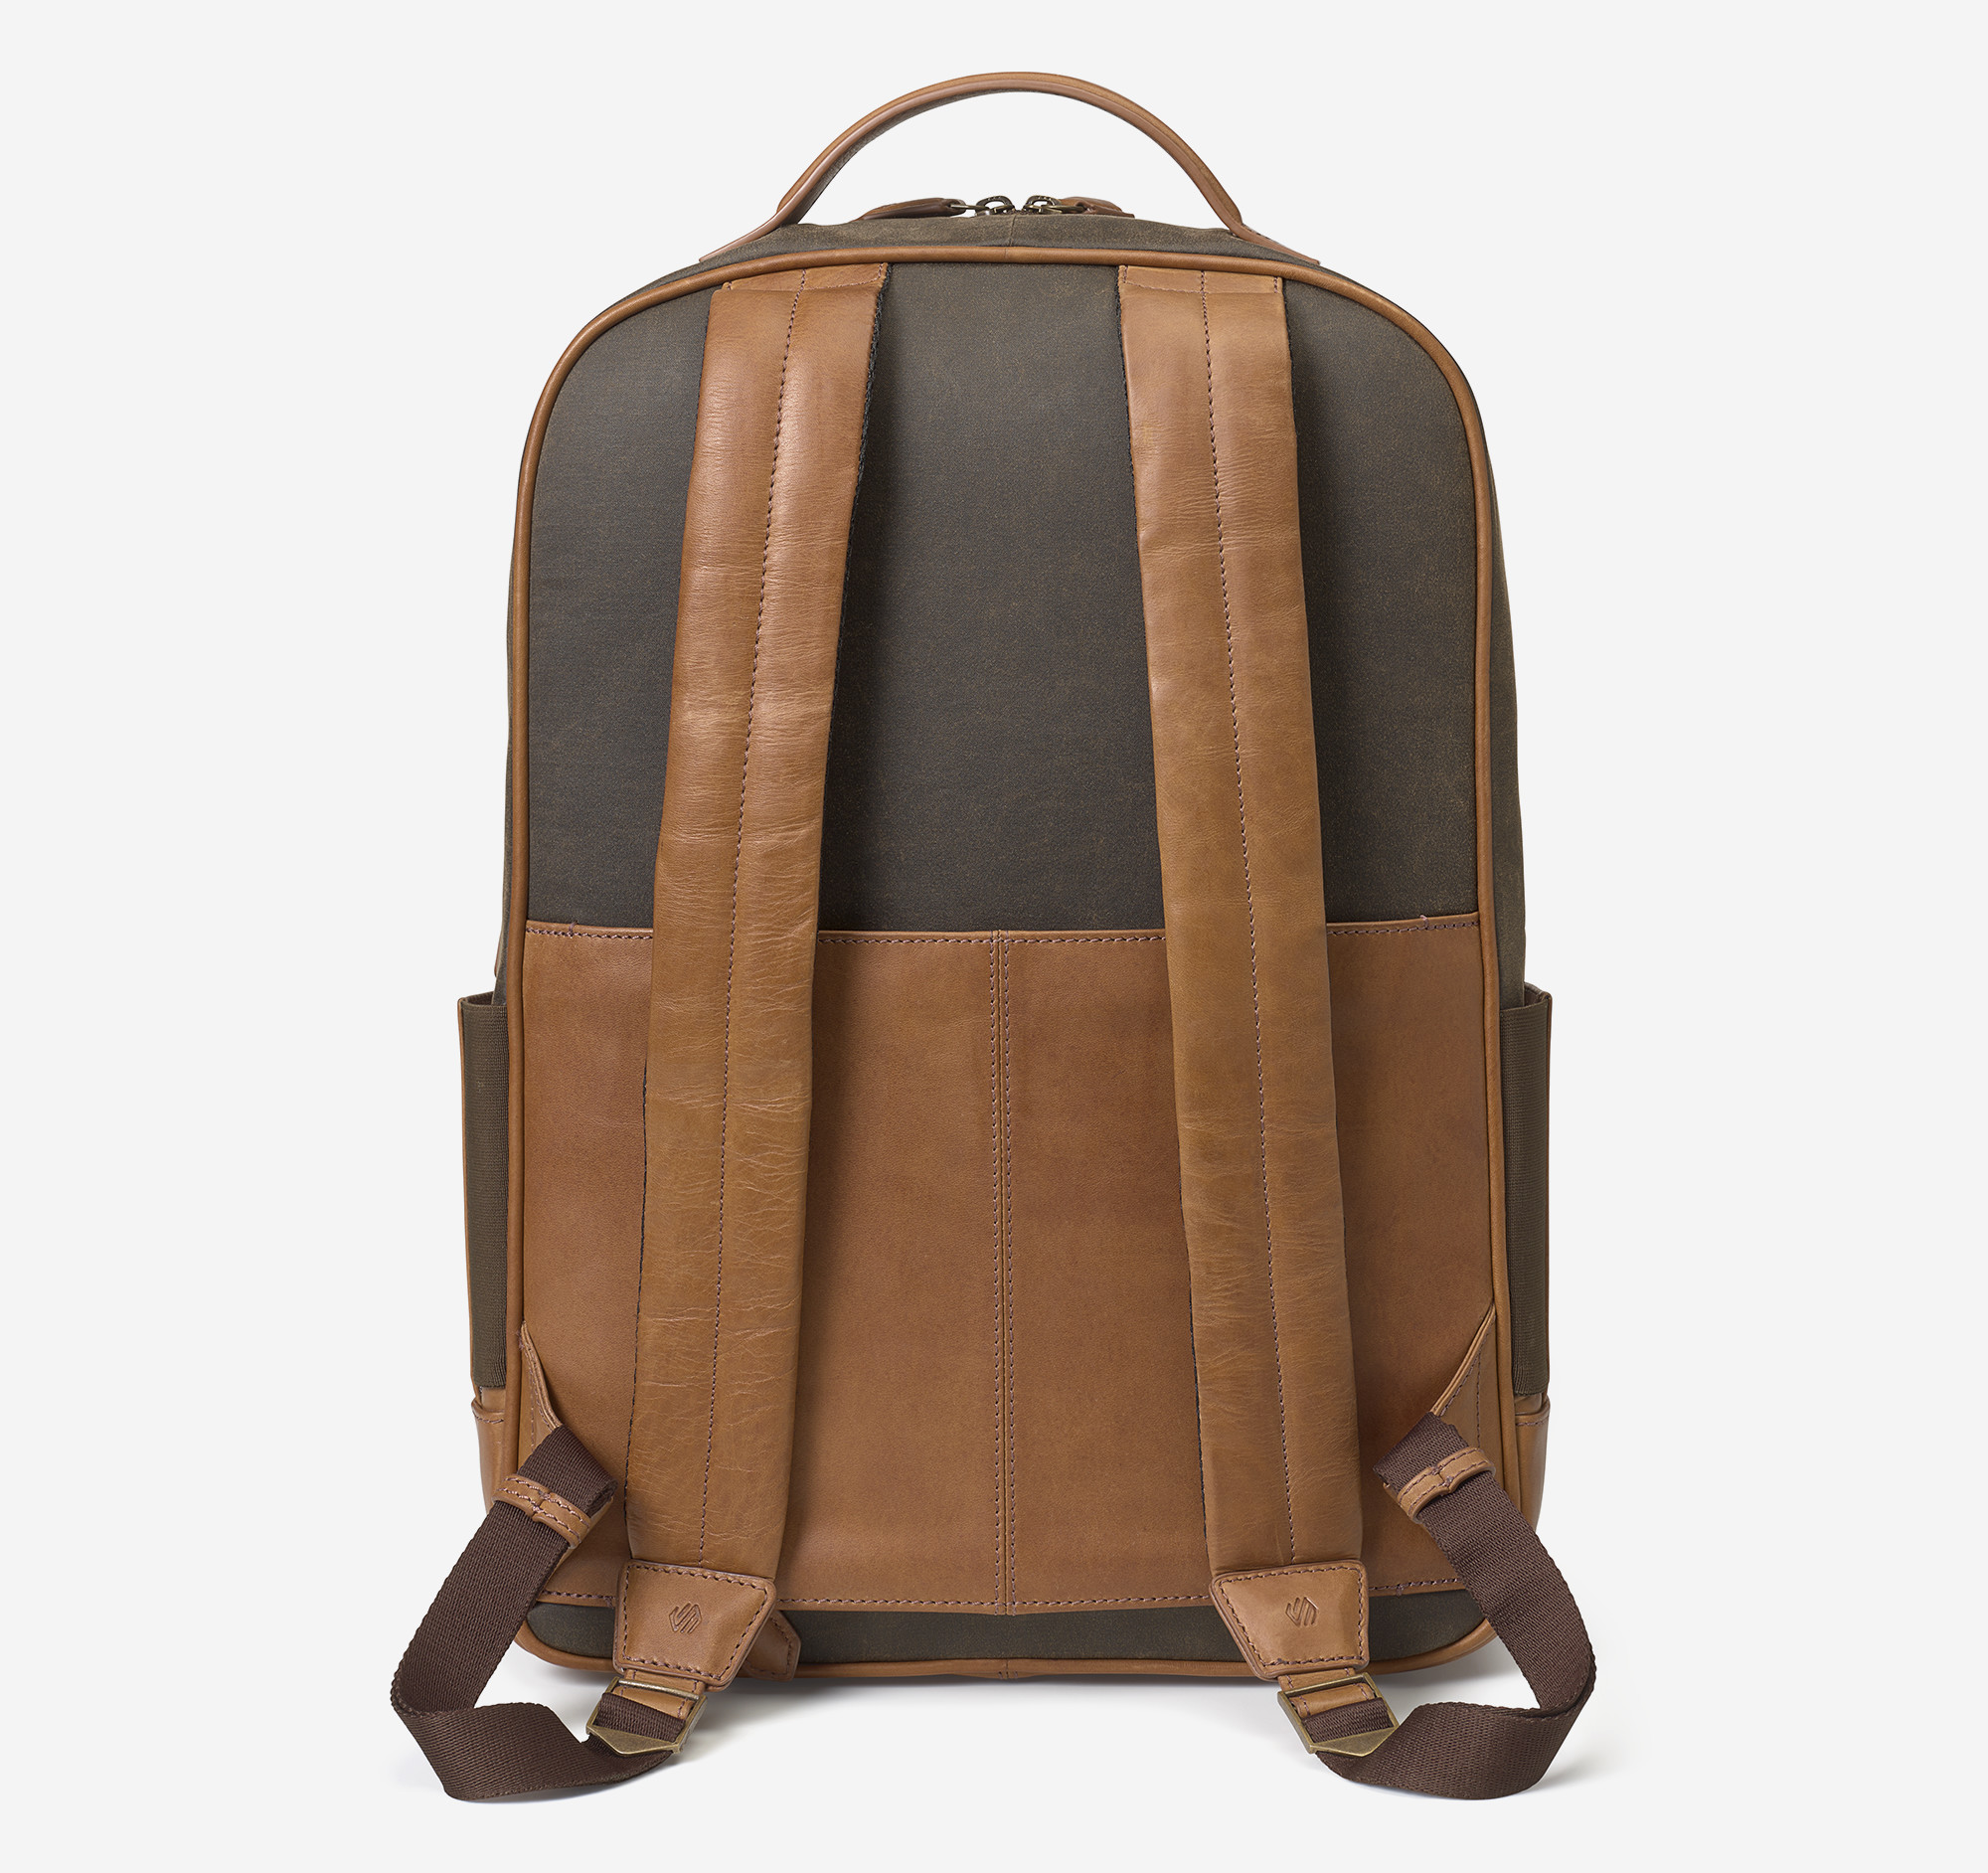 FYI, These Chic Bags Are Perfect for Carrying Your Laptop | Stylish  backpacks, Leather laptop bag, Chic backpack